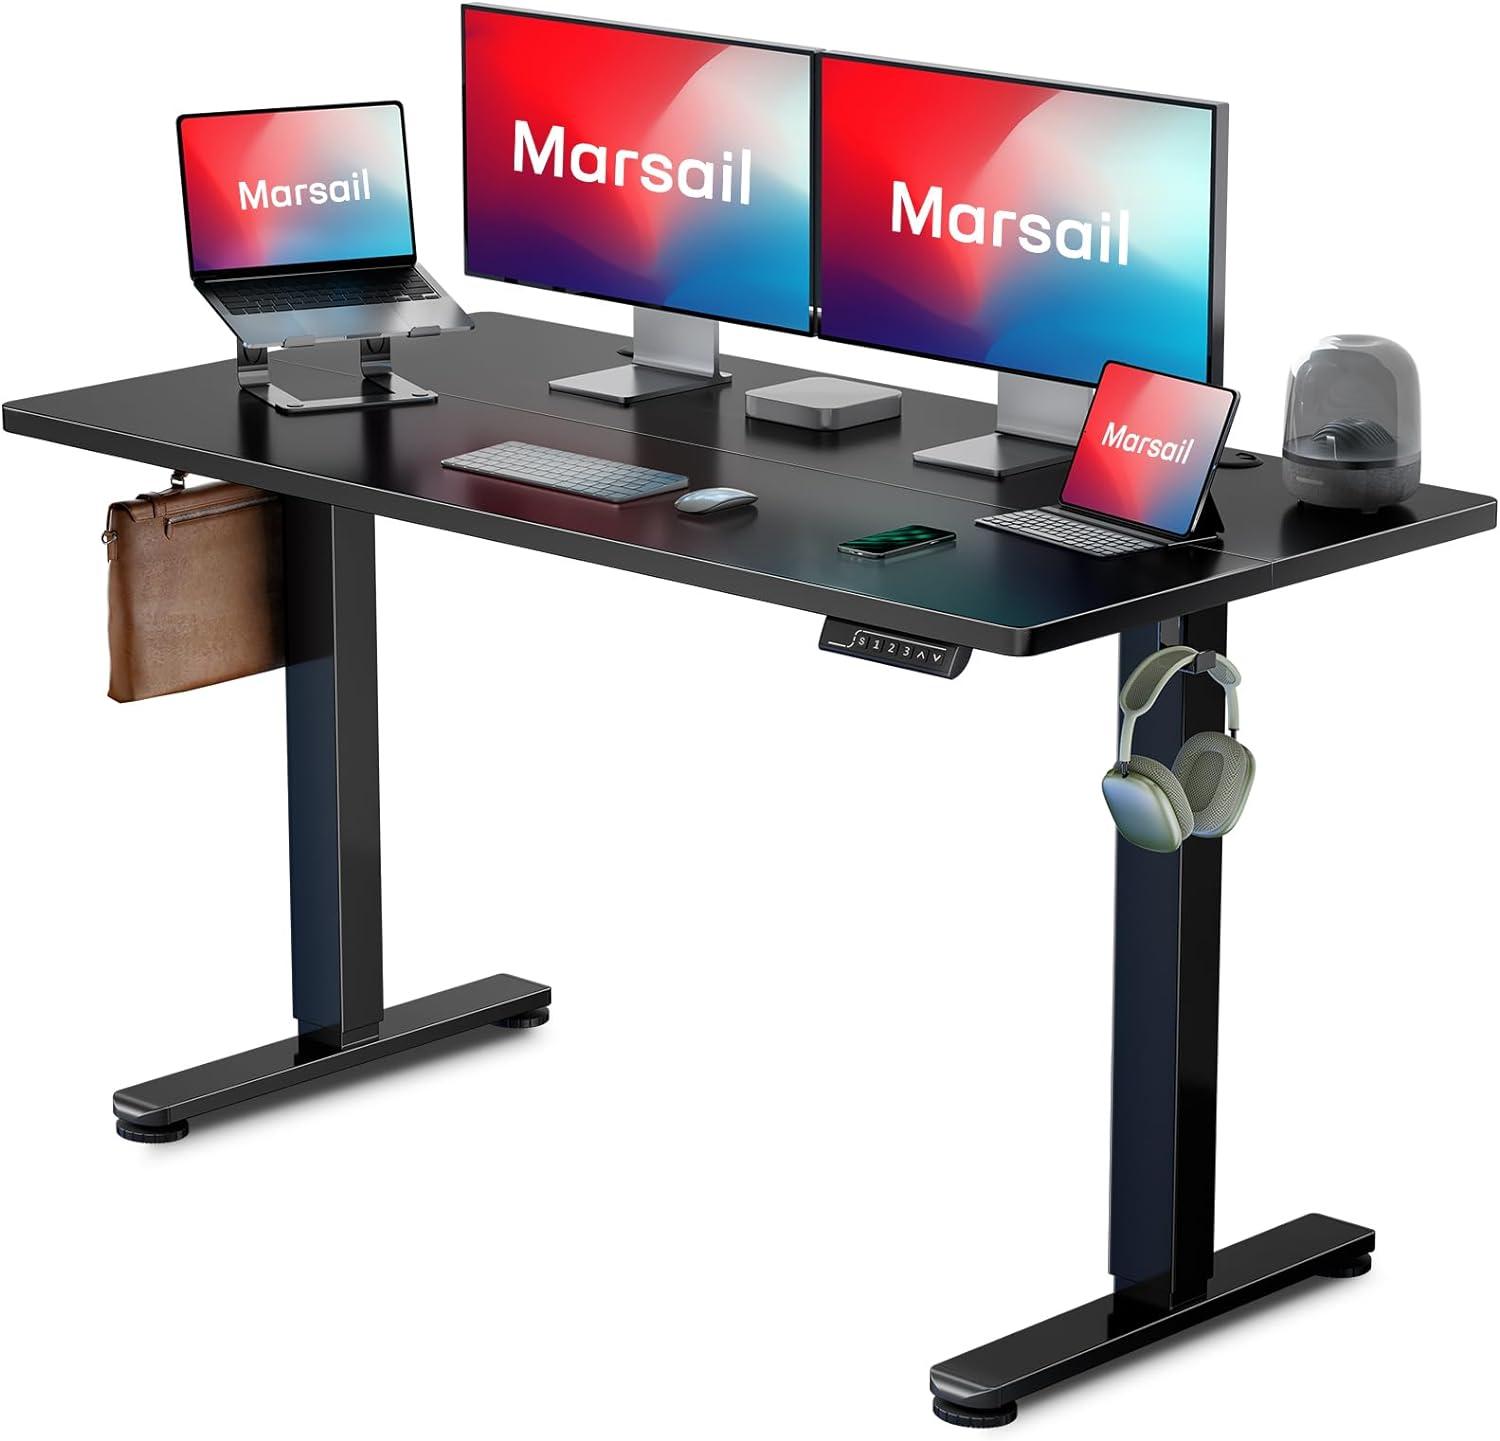 Marsail 48in Electric Adjustable Height Standing Desks for $99 Shipped